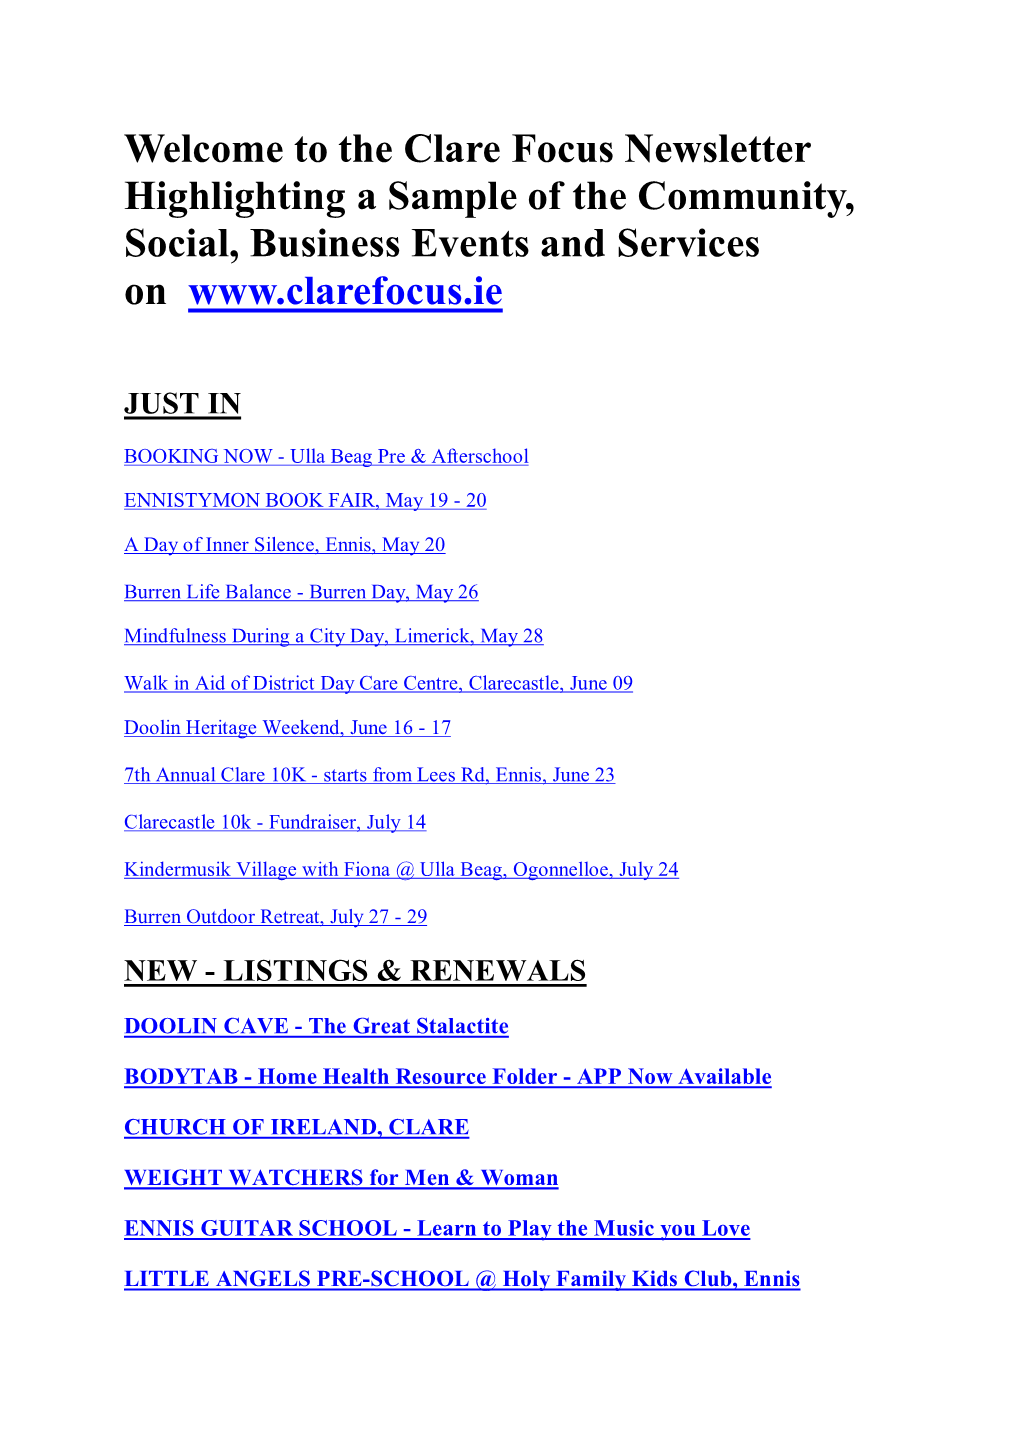 Clare Focus Newsletter Highlighting a Sample of the Community, Social, Business Events and Services On